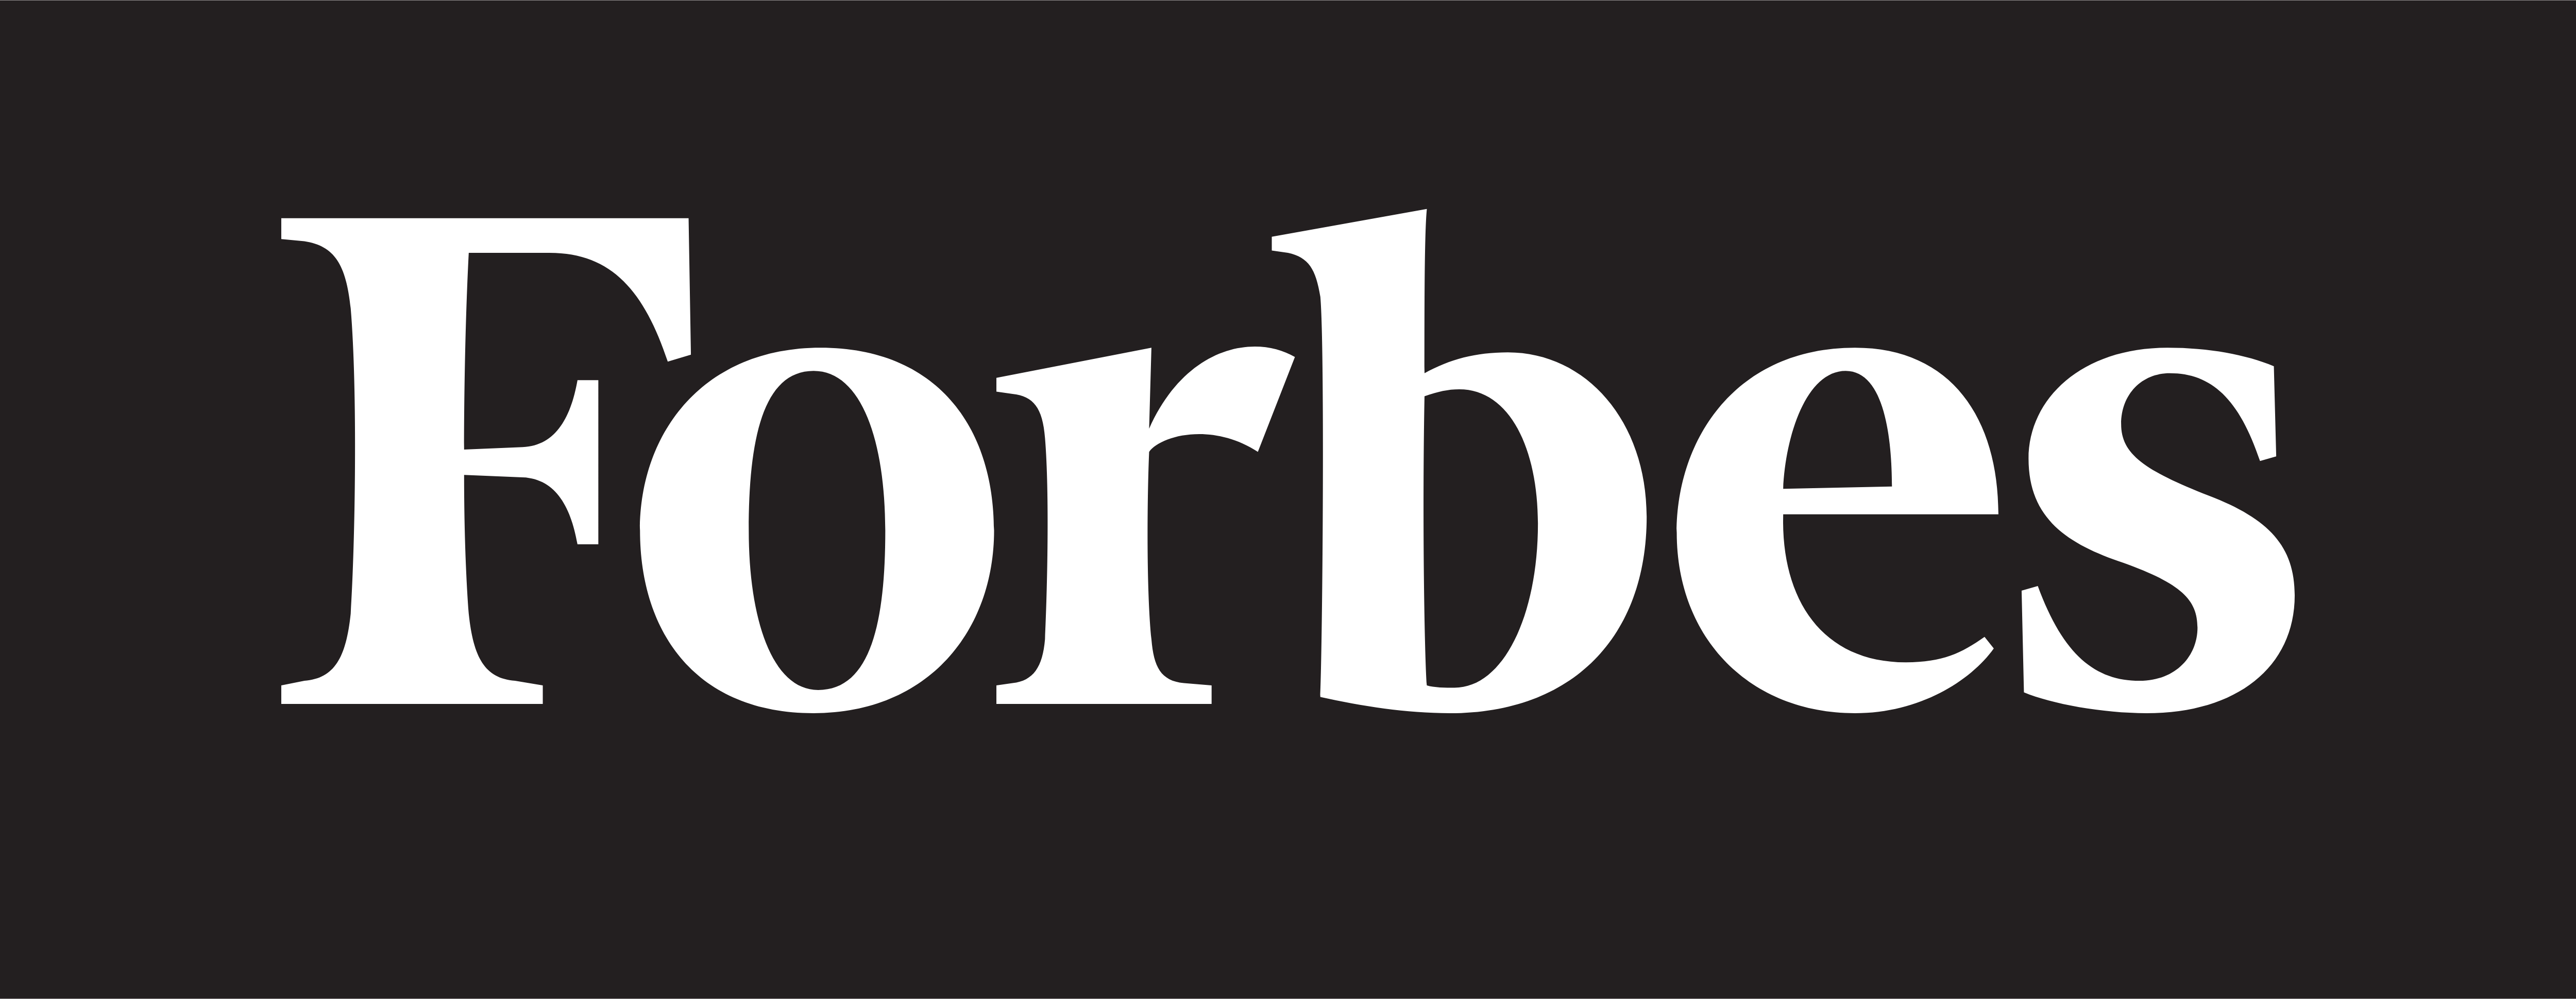 Forbes logo article featuring TO112 products